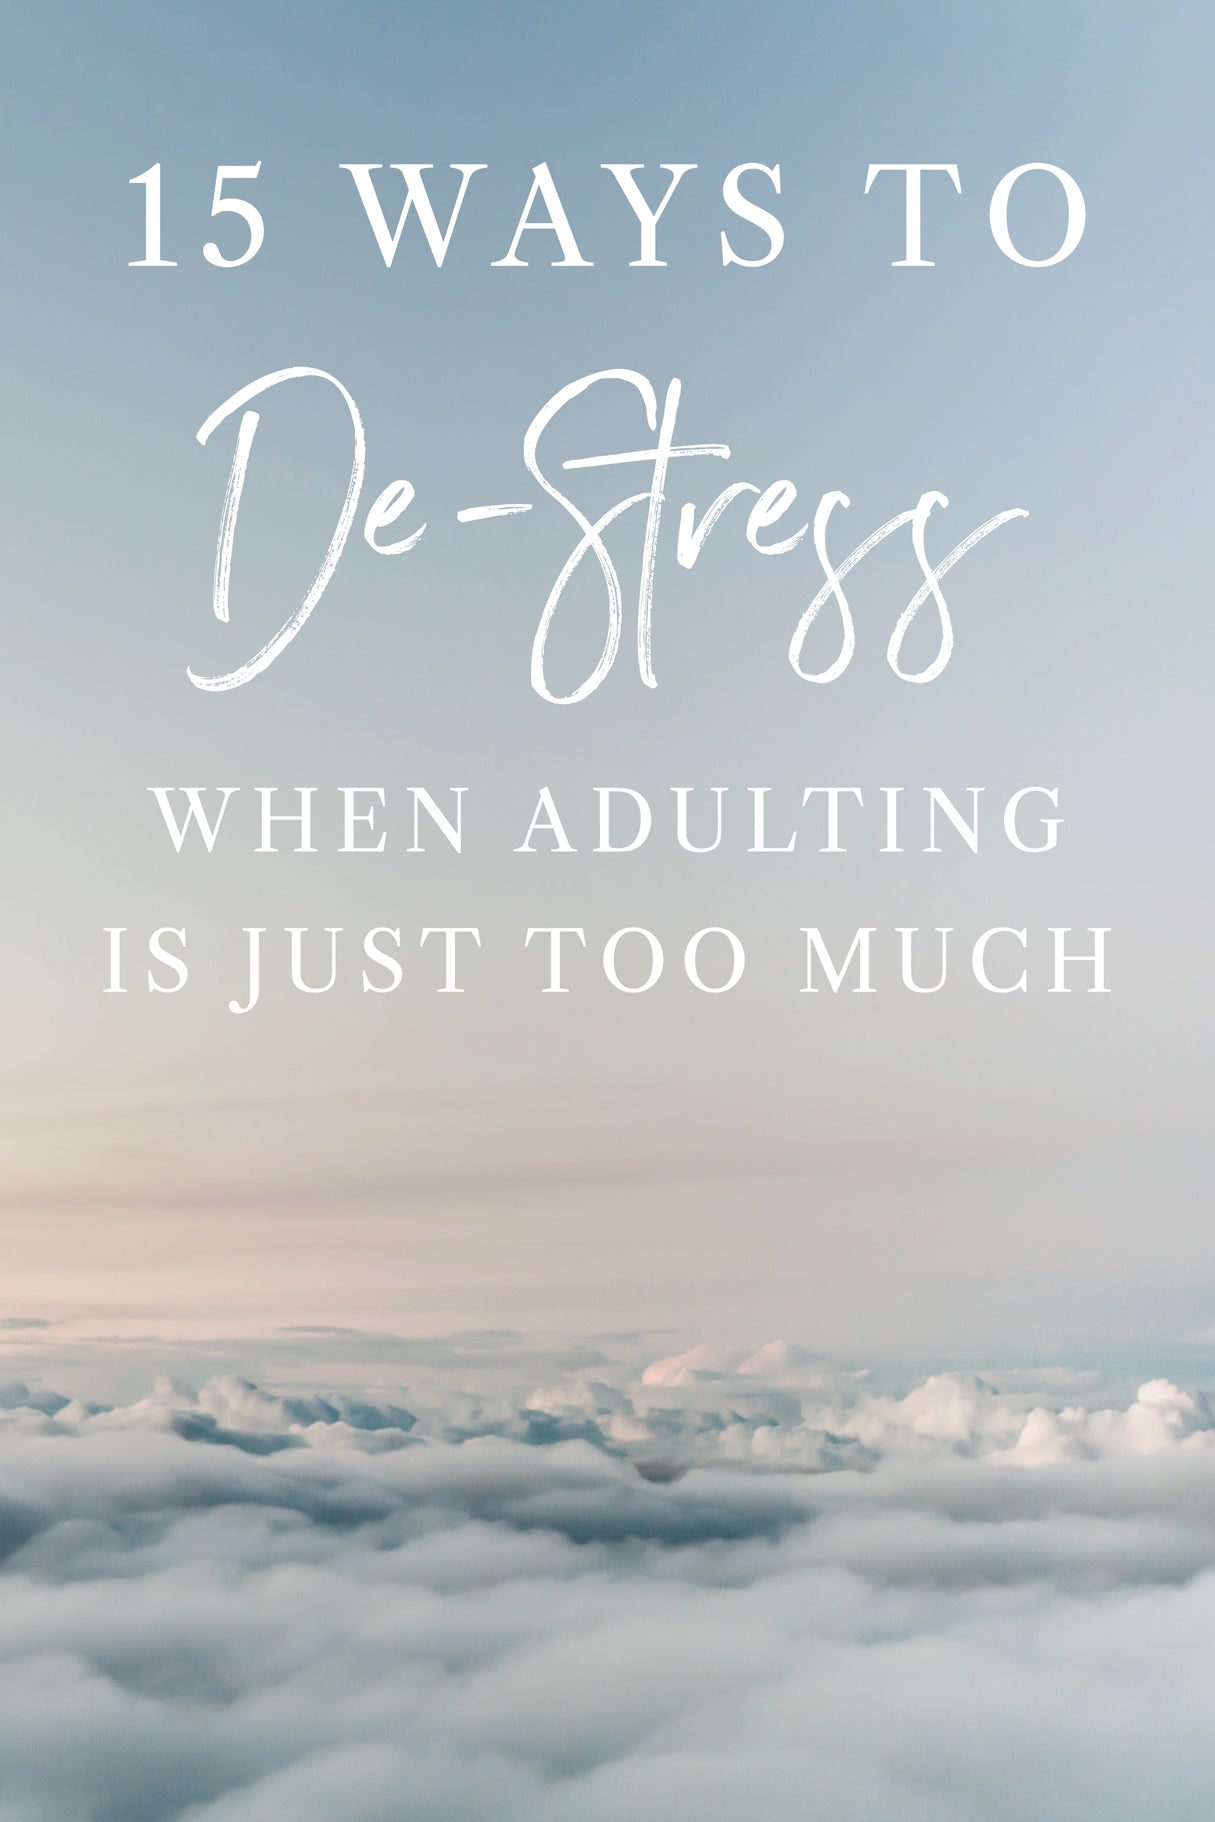 15 Ways to De-Stress When Adulting is Just Too Much